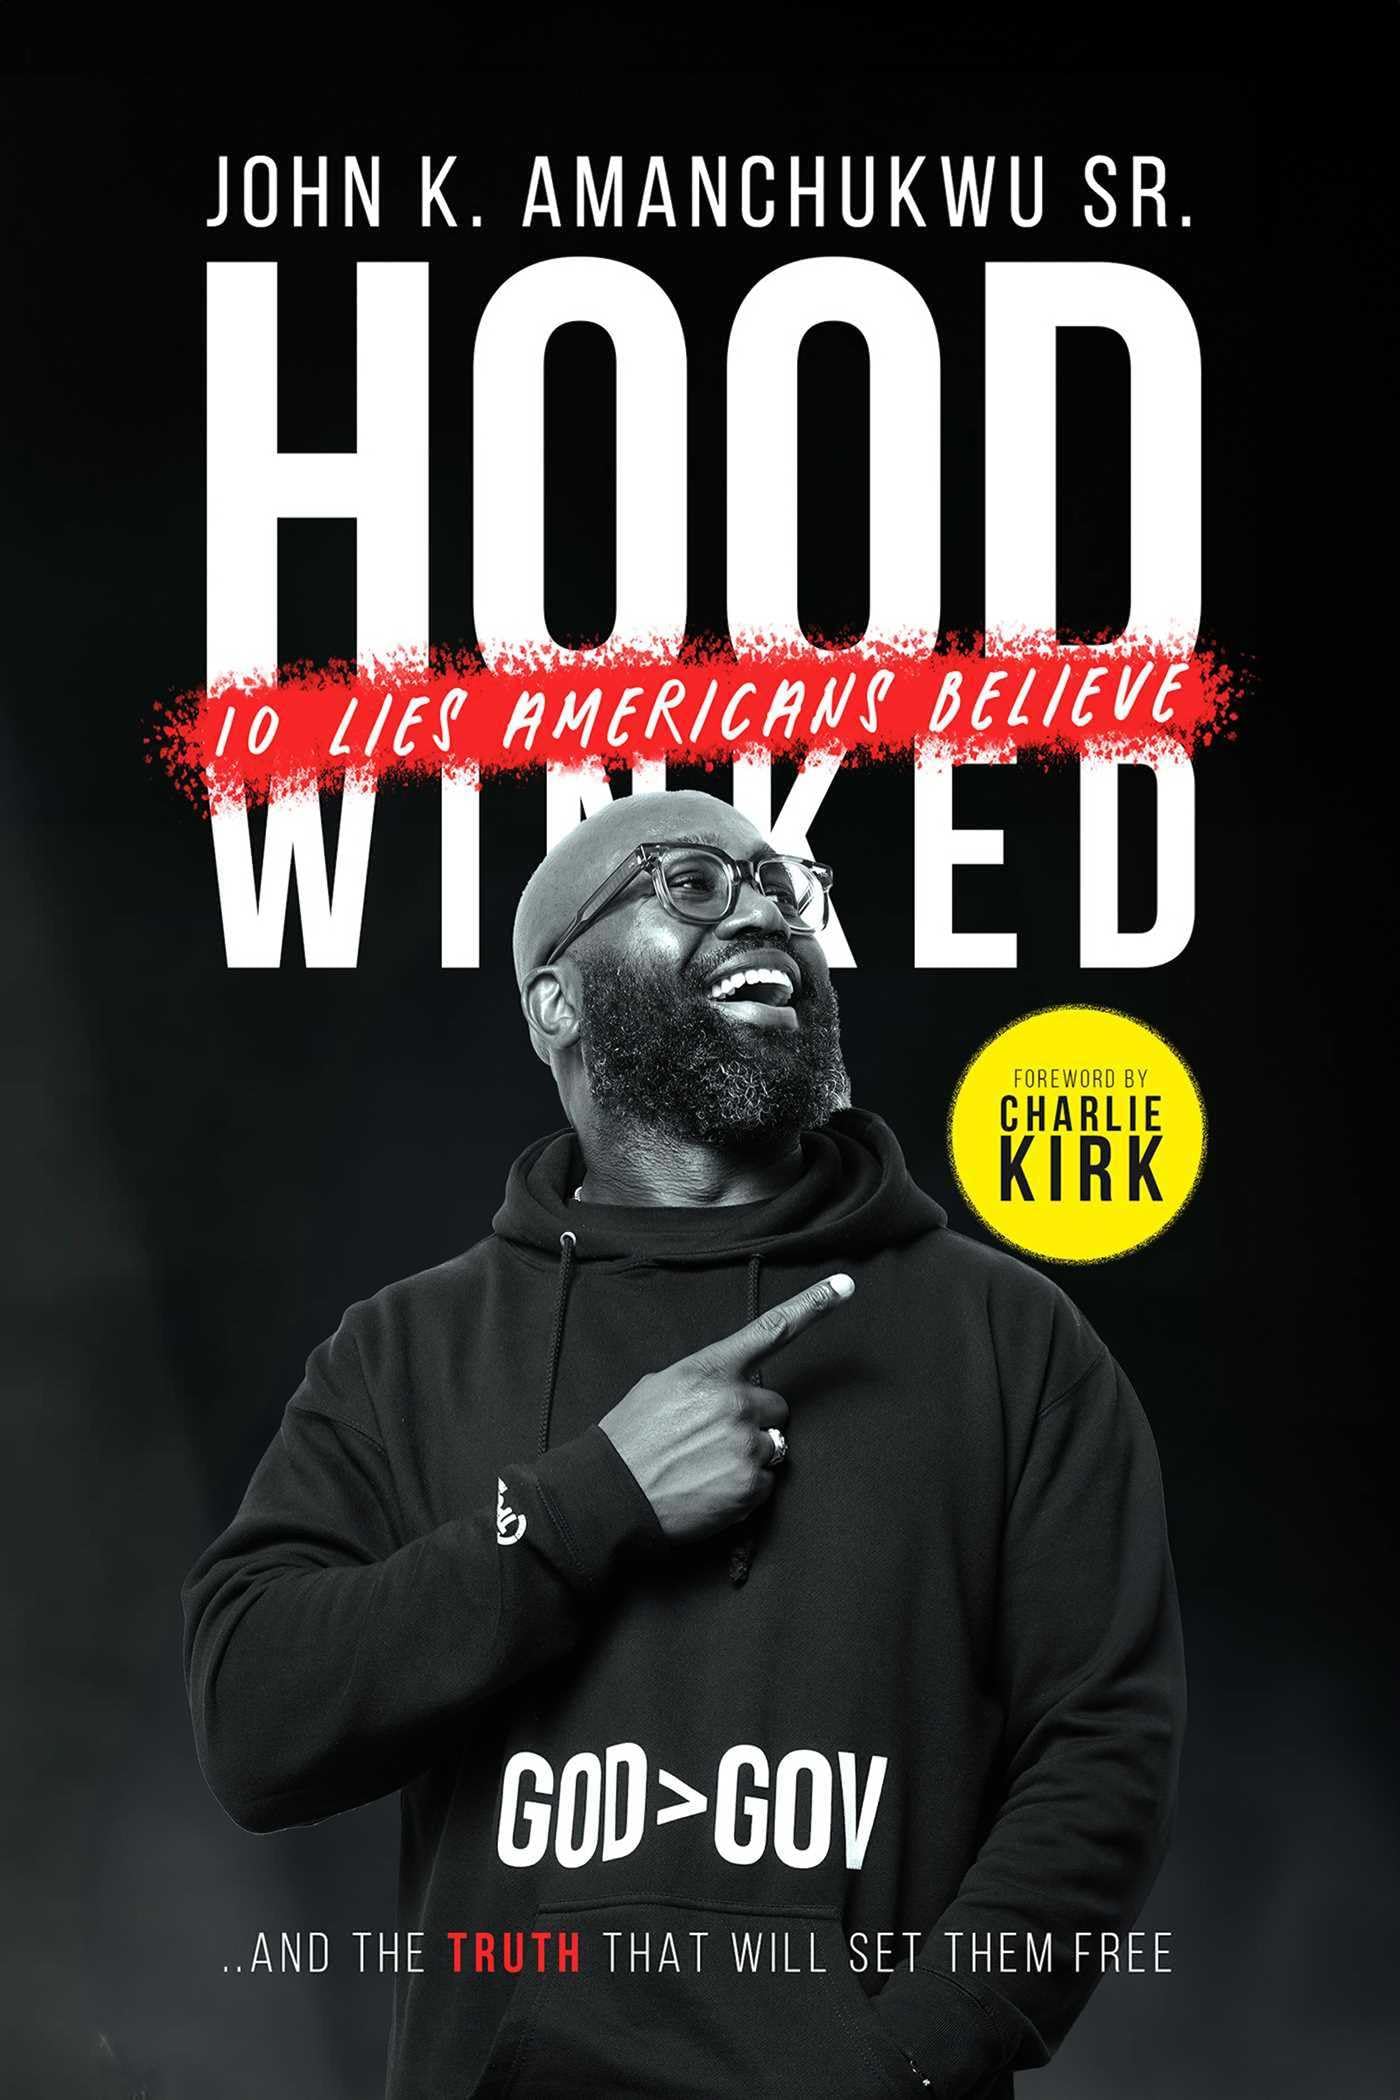 Hoodwinked: 10 Lies Americans Believe and the Truth That Will Set Them Free by Amanchukwu, John K.